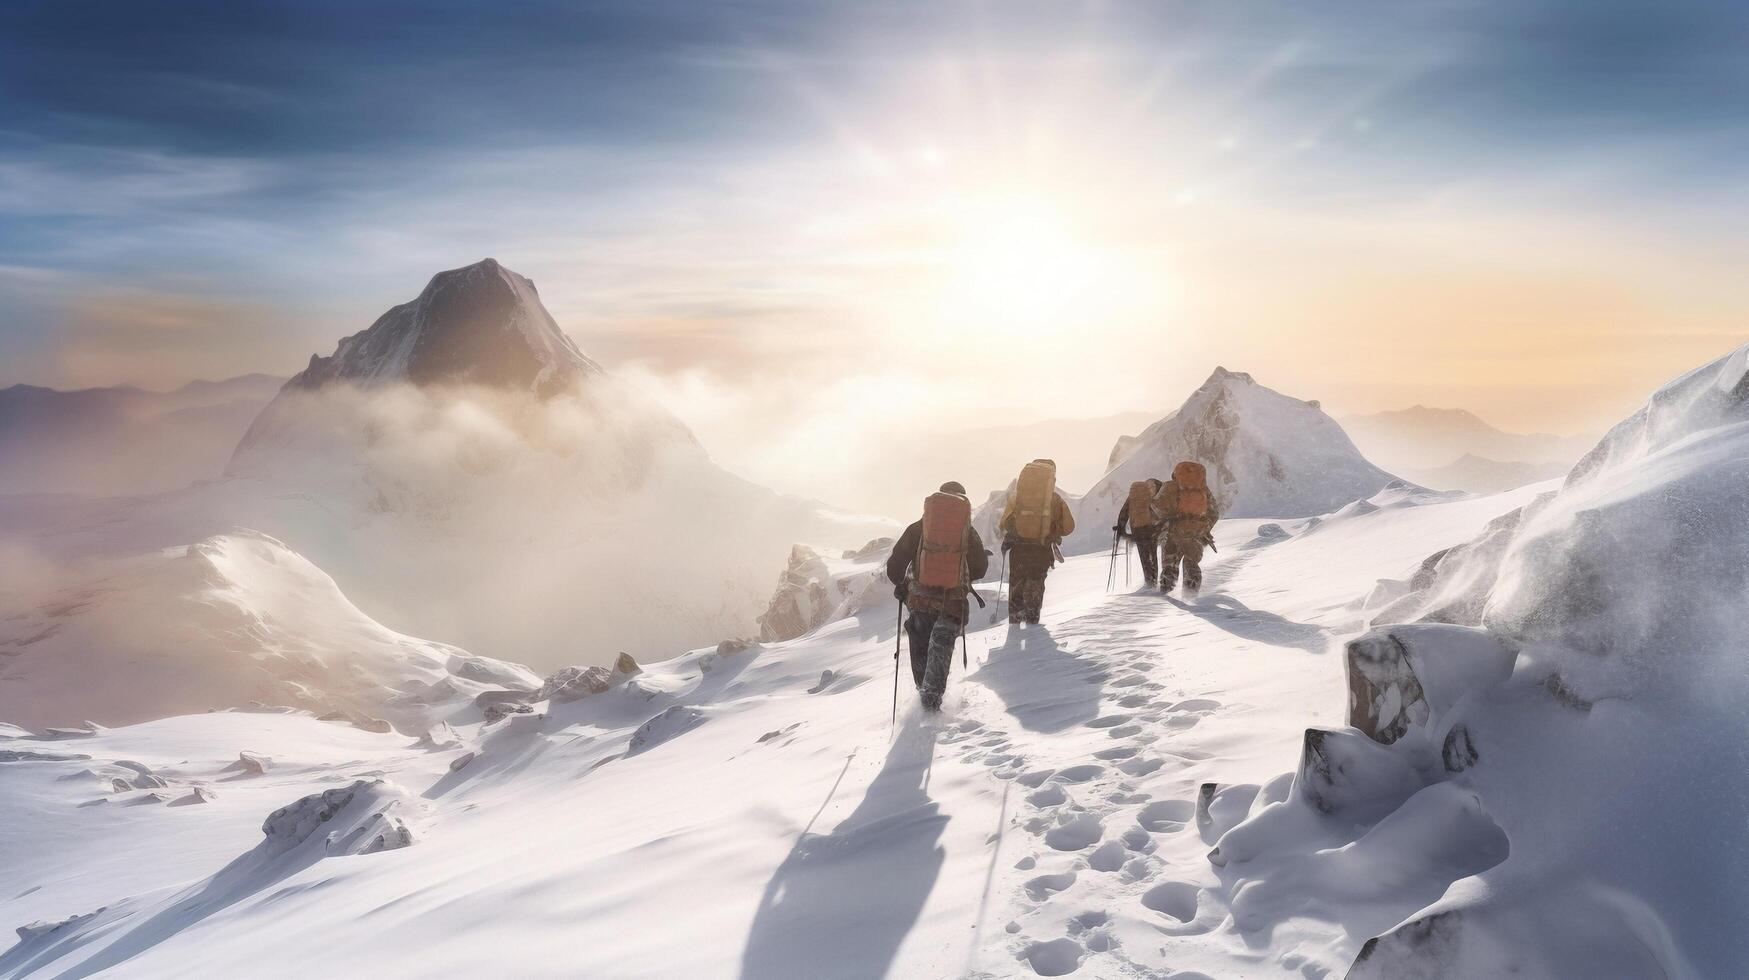 Group of people hiking in winter mountains with snowshoes and backpacks with . photo